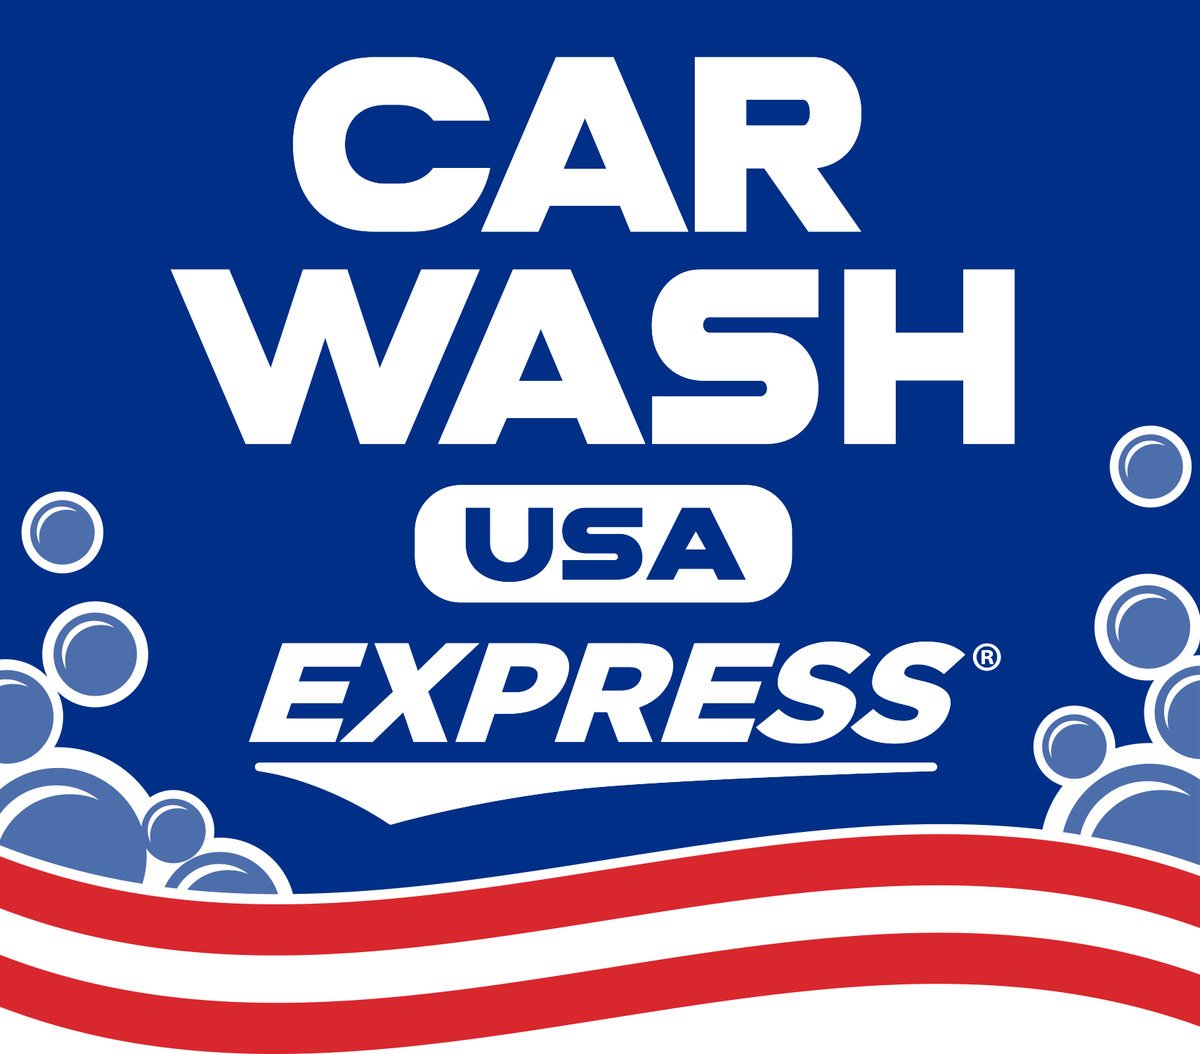 We are the largest express exterior car wash. Our focus is to provide you with the very best car wash, period.